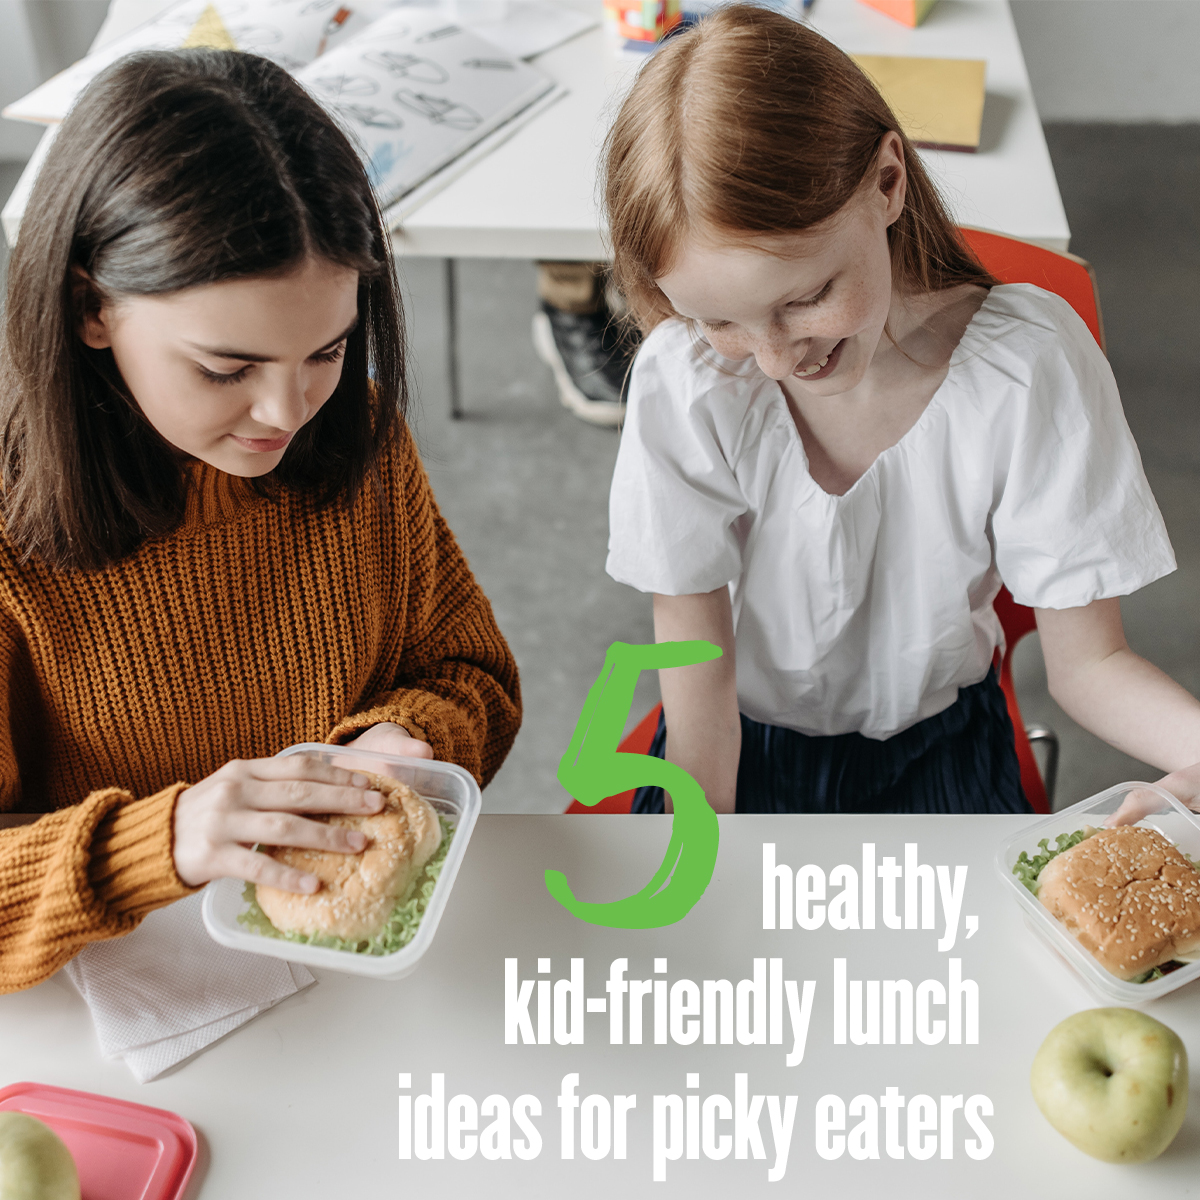 5 Healthy, Kid-Friendly Lunch Ideas for Picky Eaters